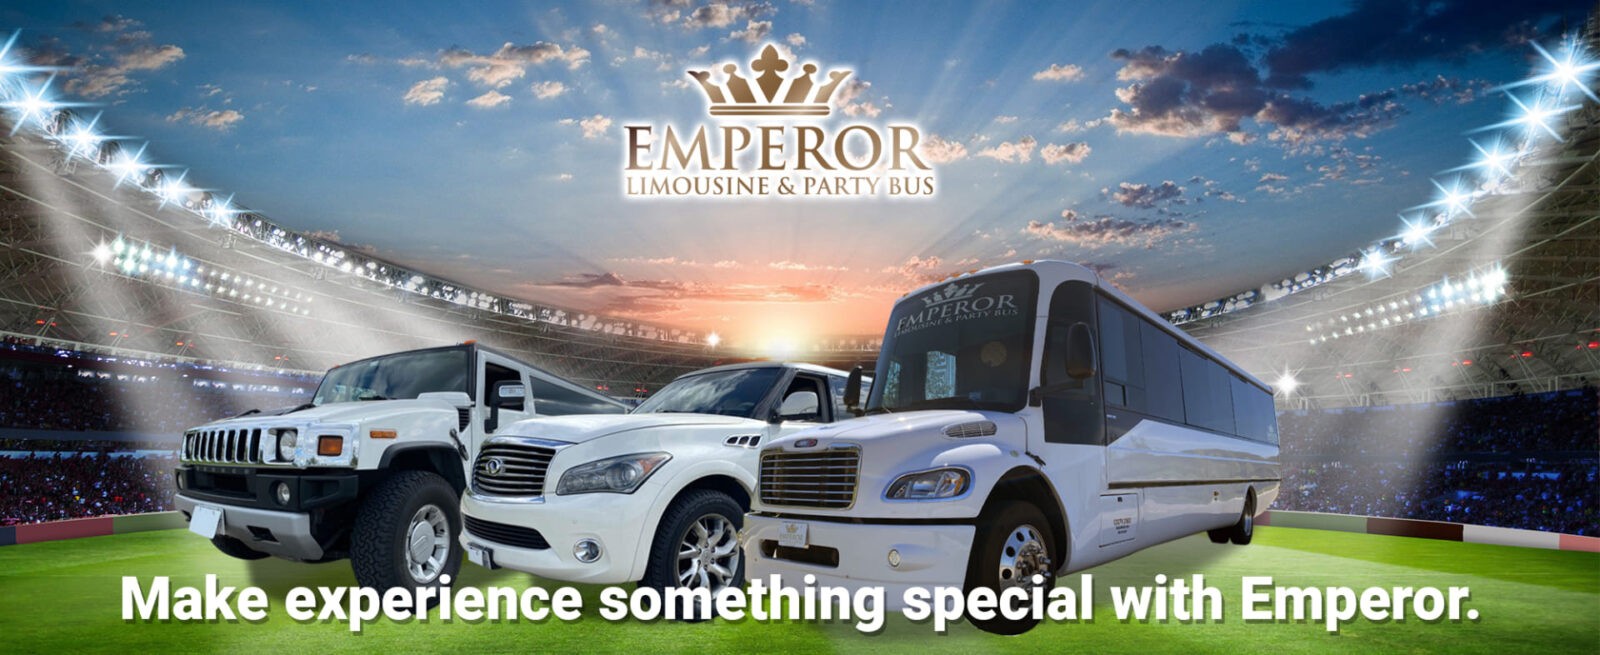 Emperor - Luxurious Limousines and Party Buses in Chicago